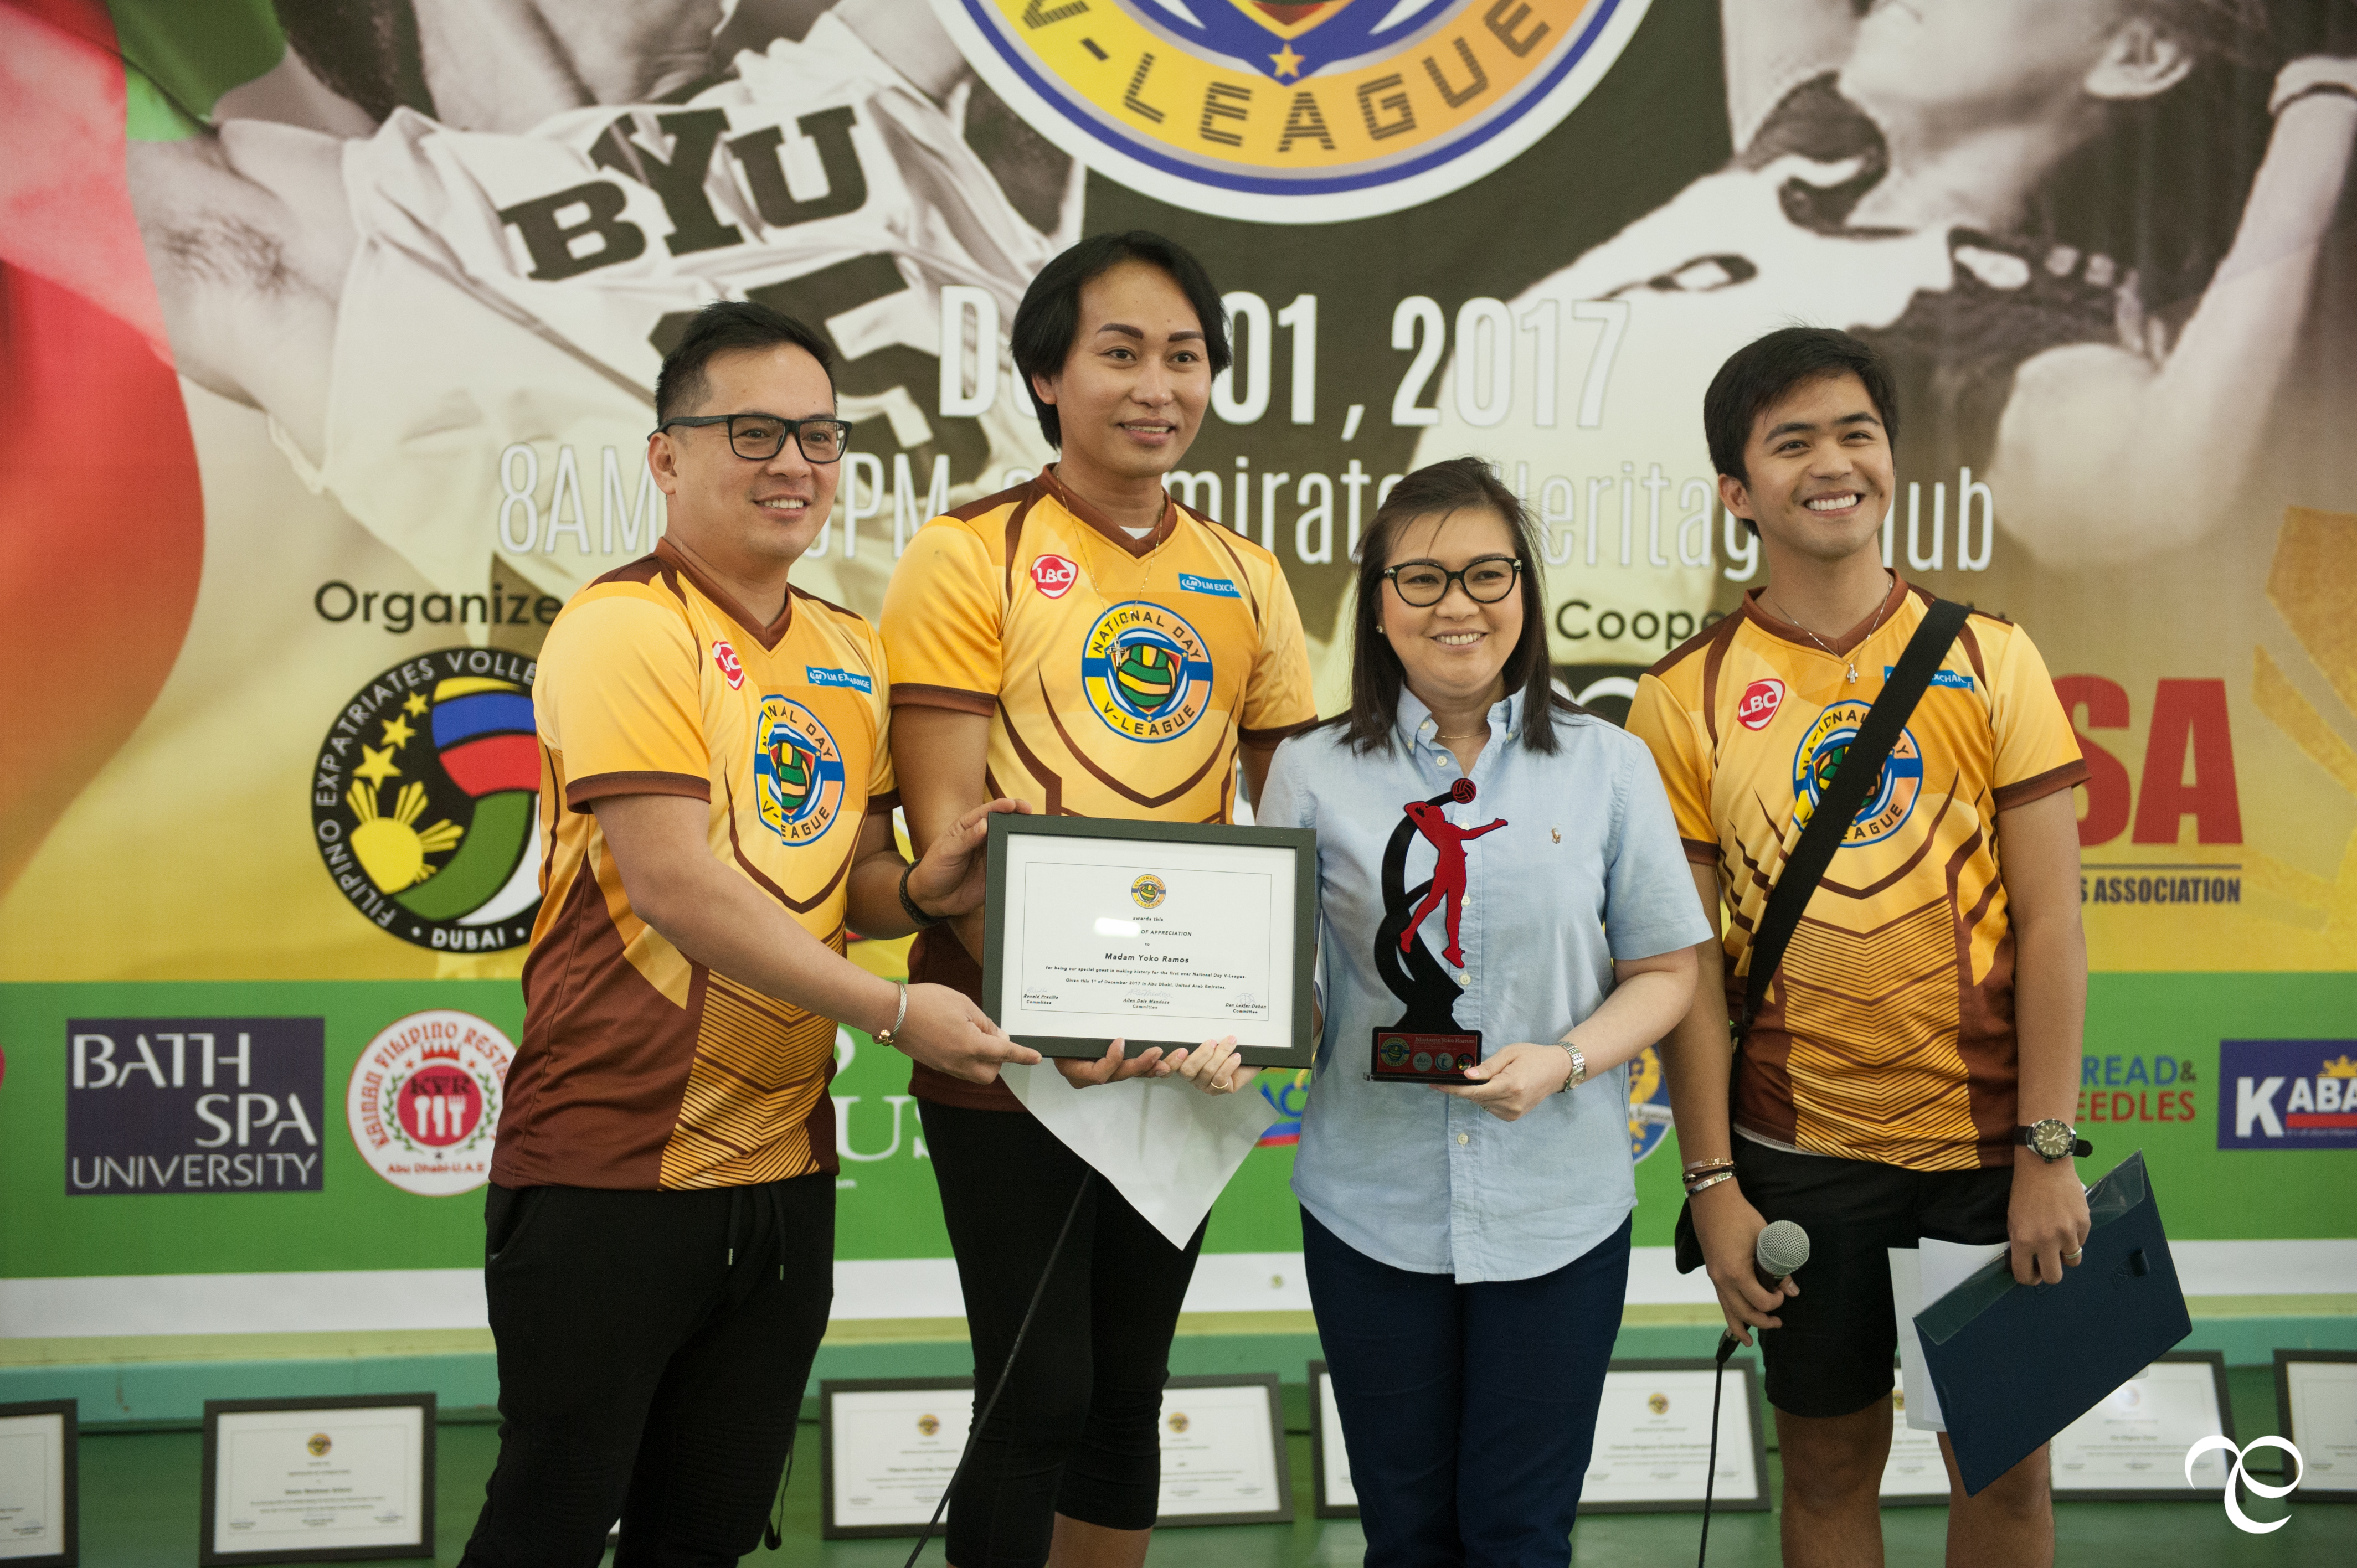 Madam Yoko Ramos Vingno receiving a gesture of certification to remember the event by